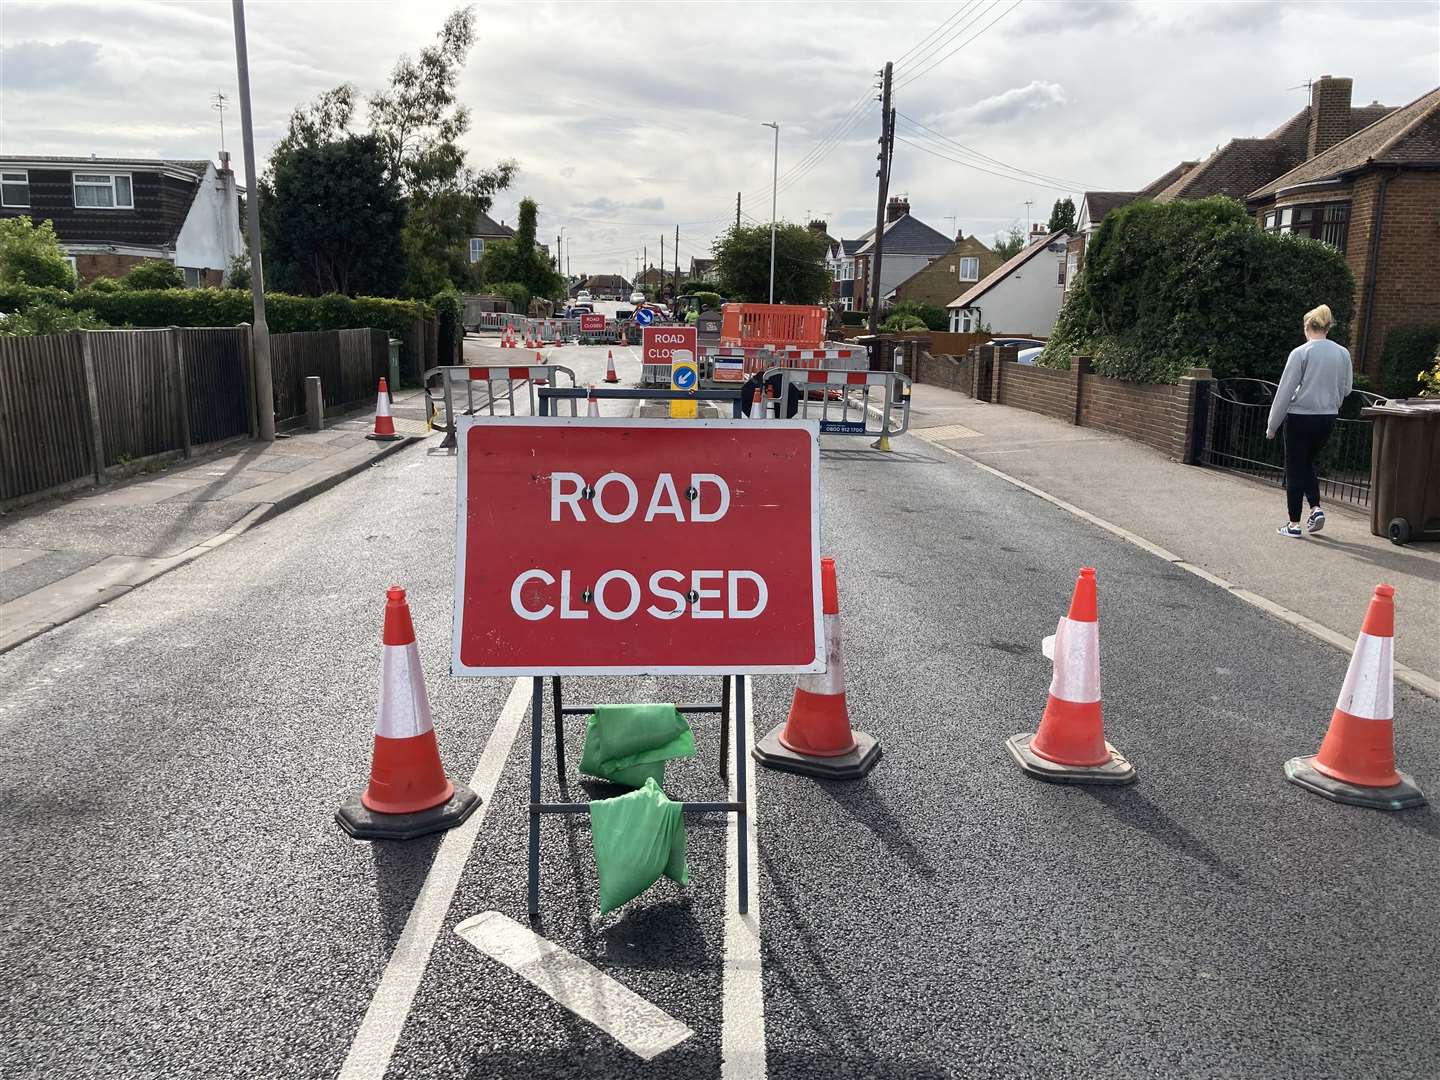 Repair work has closed the recently resurfaced Minster Road at Halfway